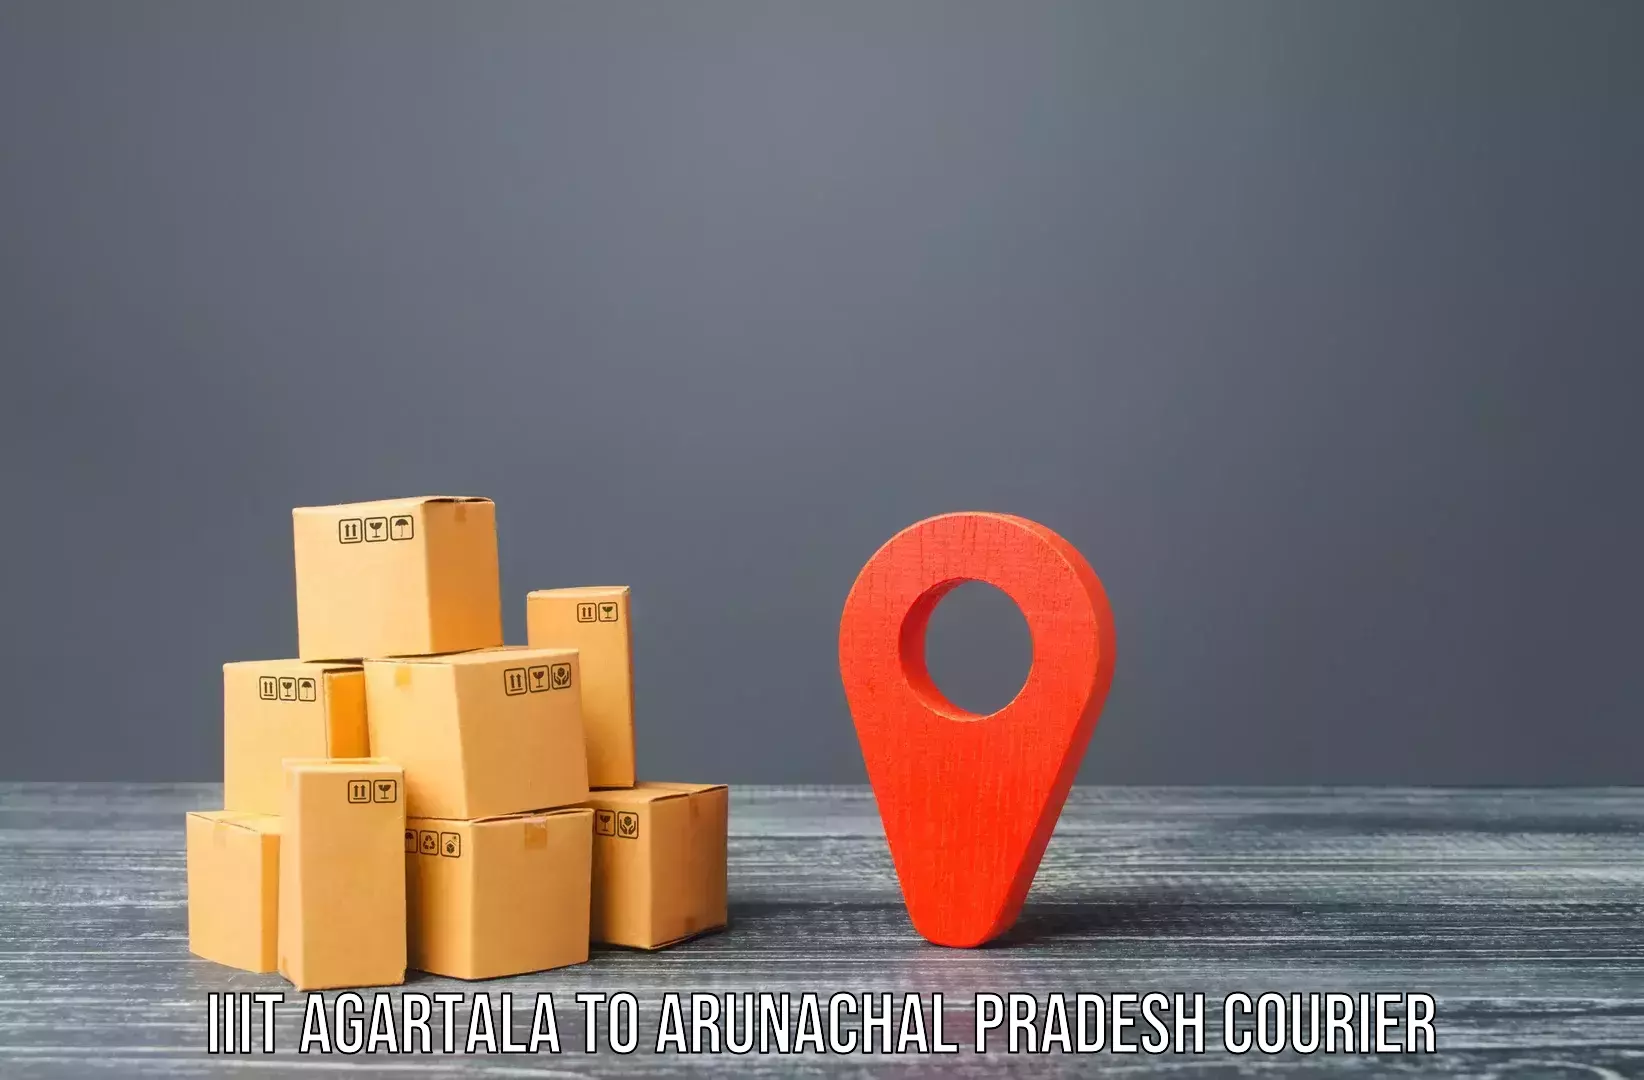 Affordable relocation services in IIIT Agartala to Dirang